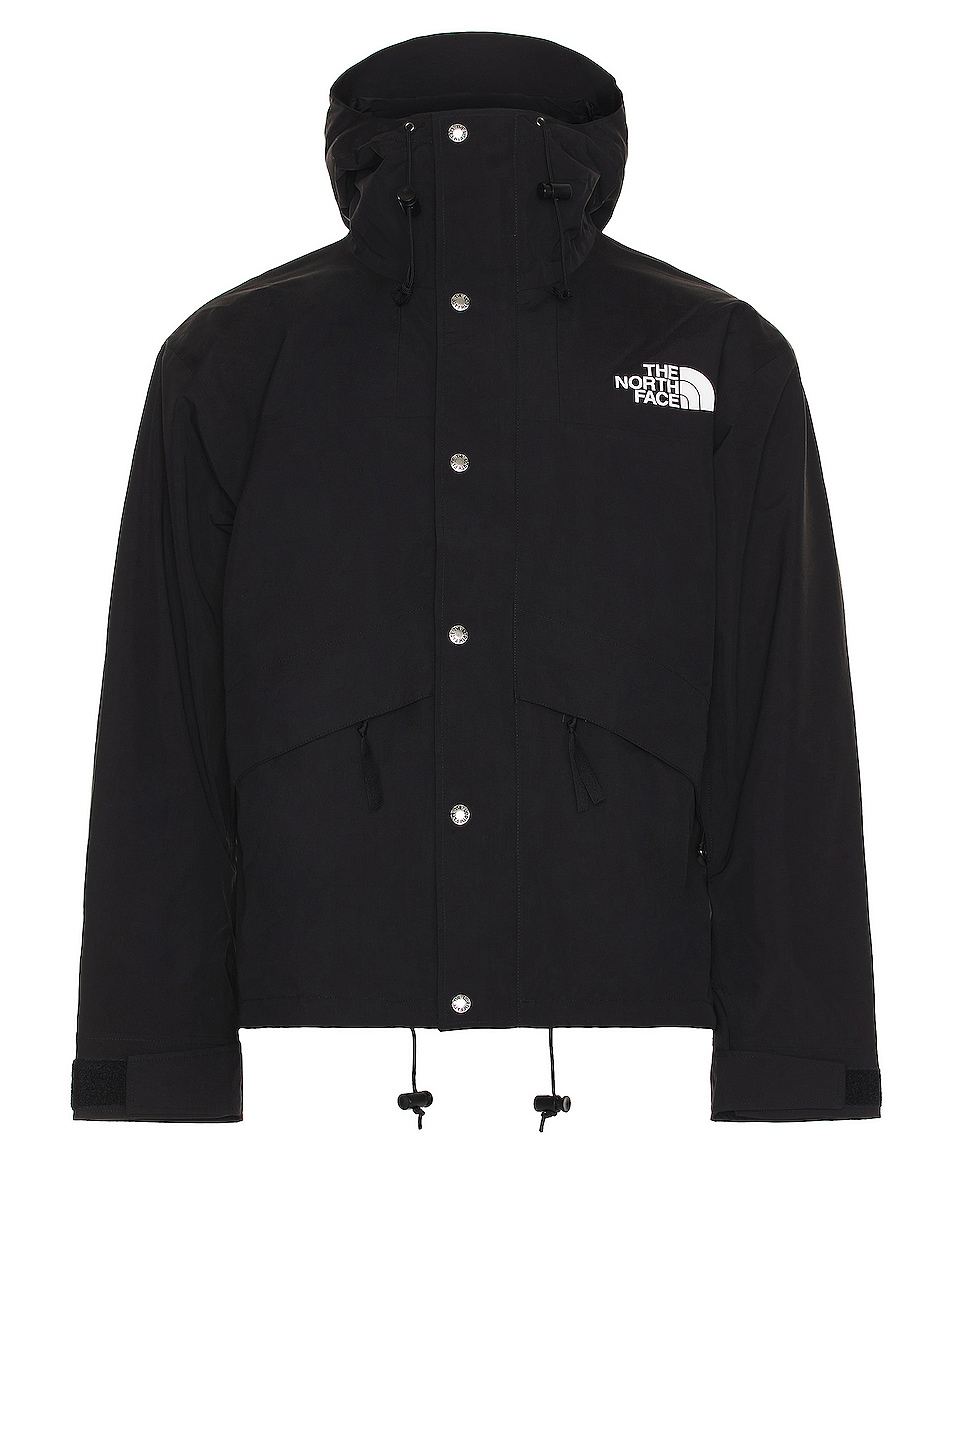 Image 1 of The North Face 86 Retro Mountain Jacket in Tnf Black